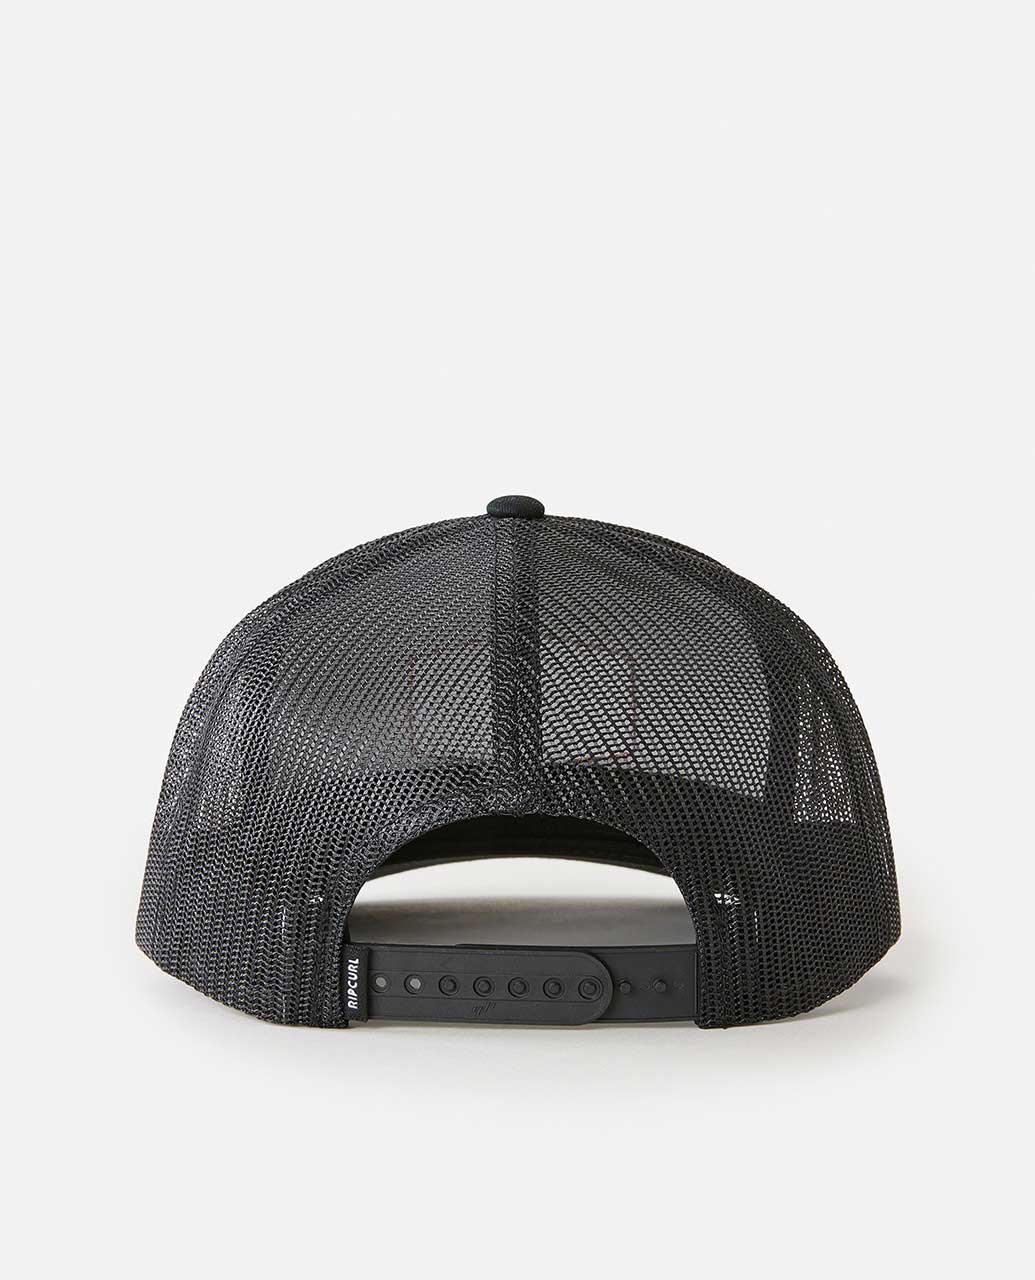 Rip Curl Trademarked Cuver Trucker Gorra Hombre